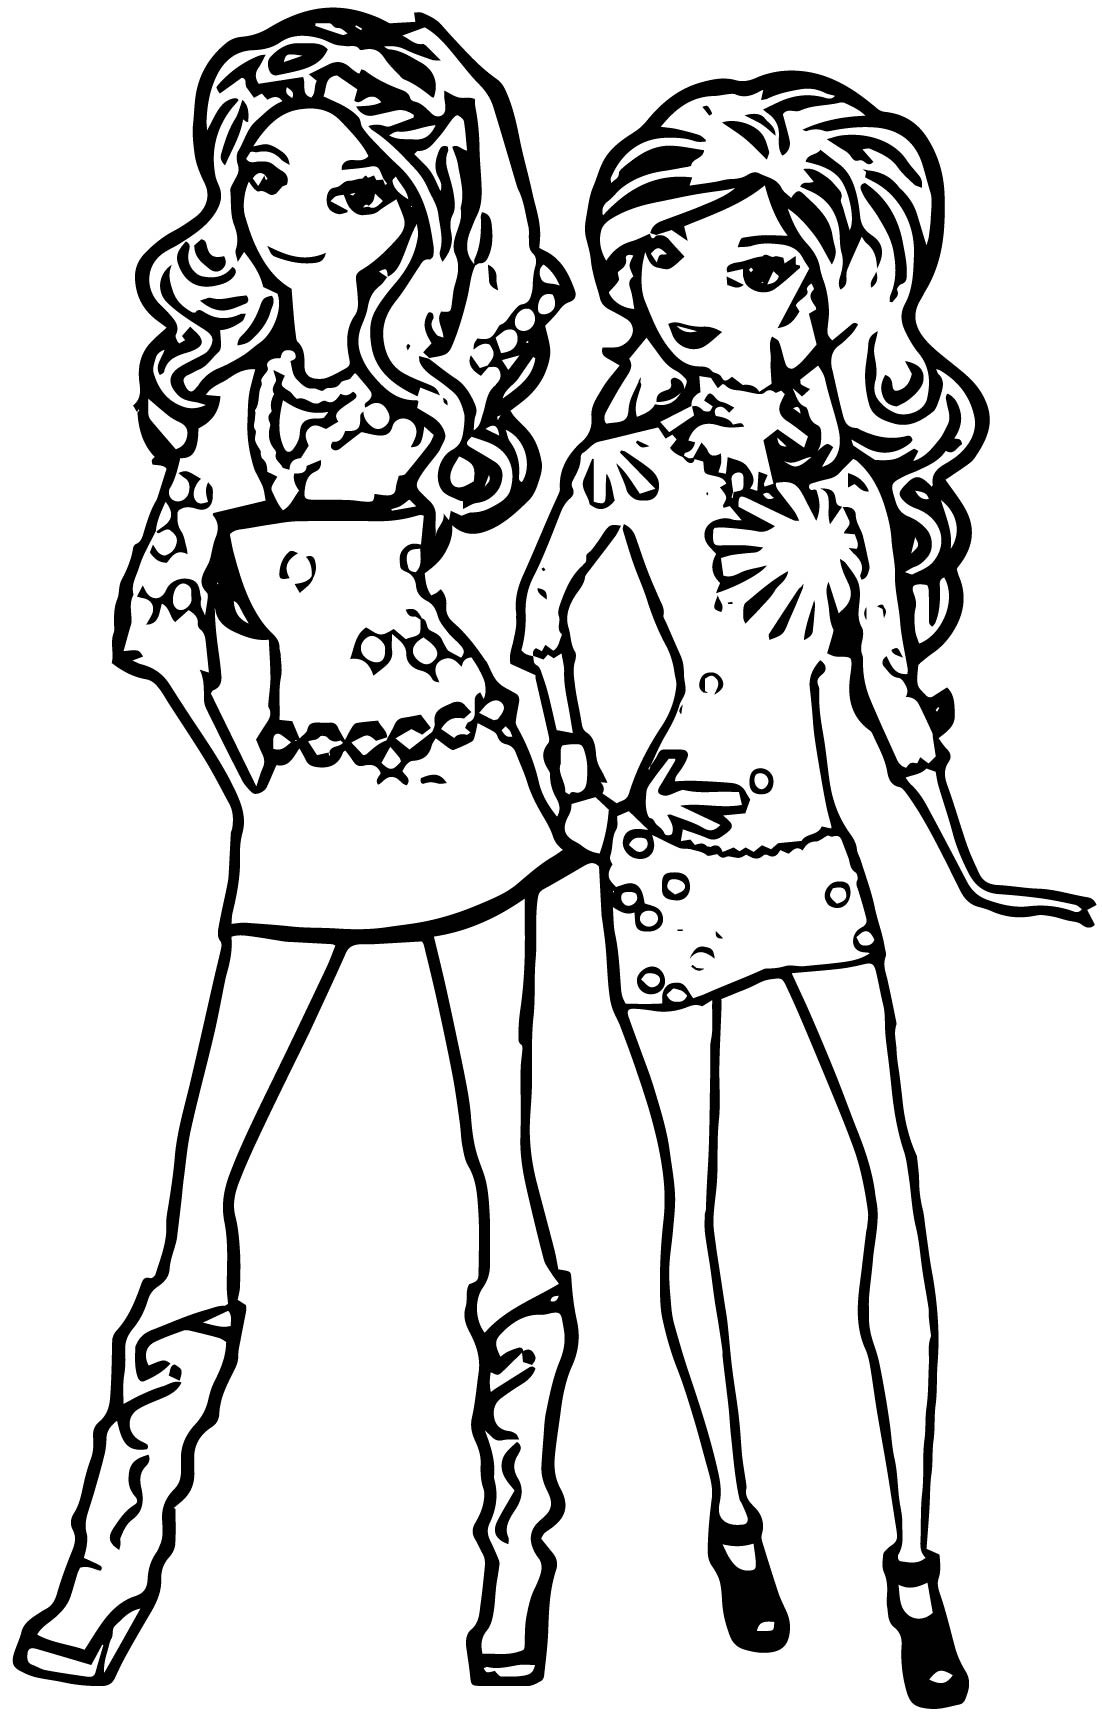 Best Friend Coloring Pages For Girls
 Best Friend Coloring Pages coloringsuite